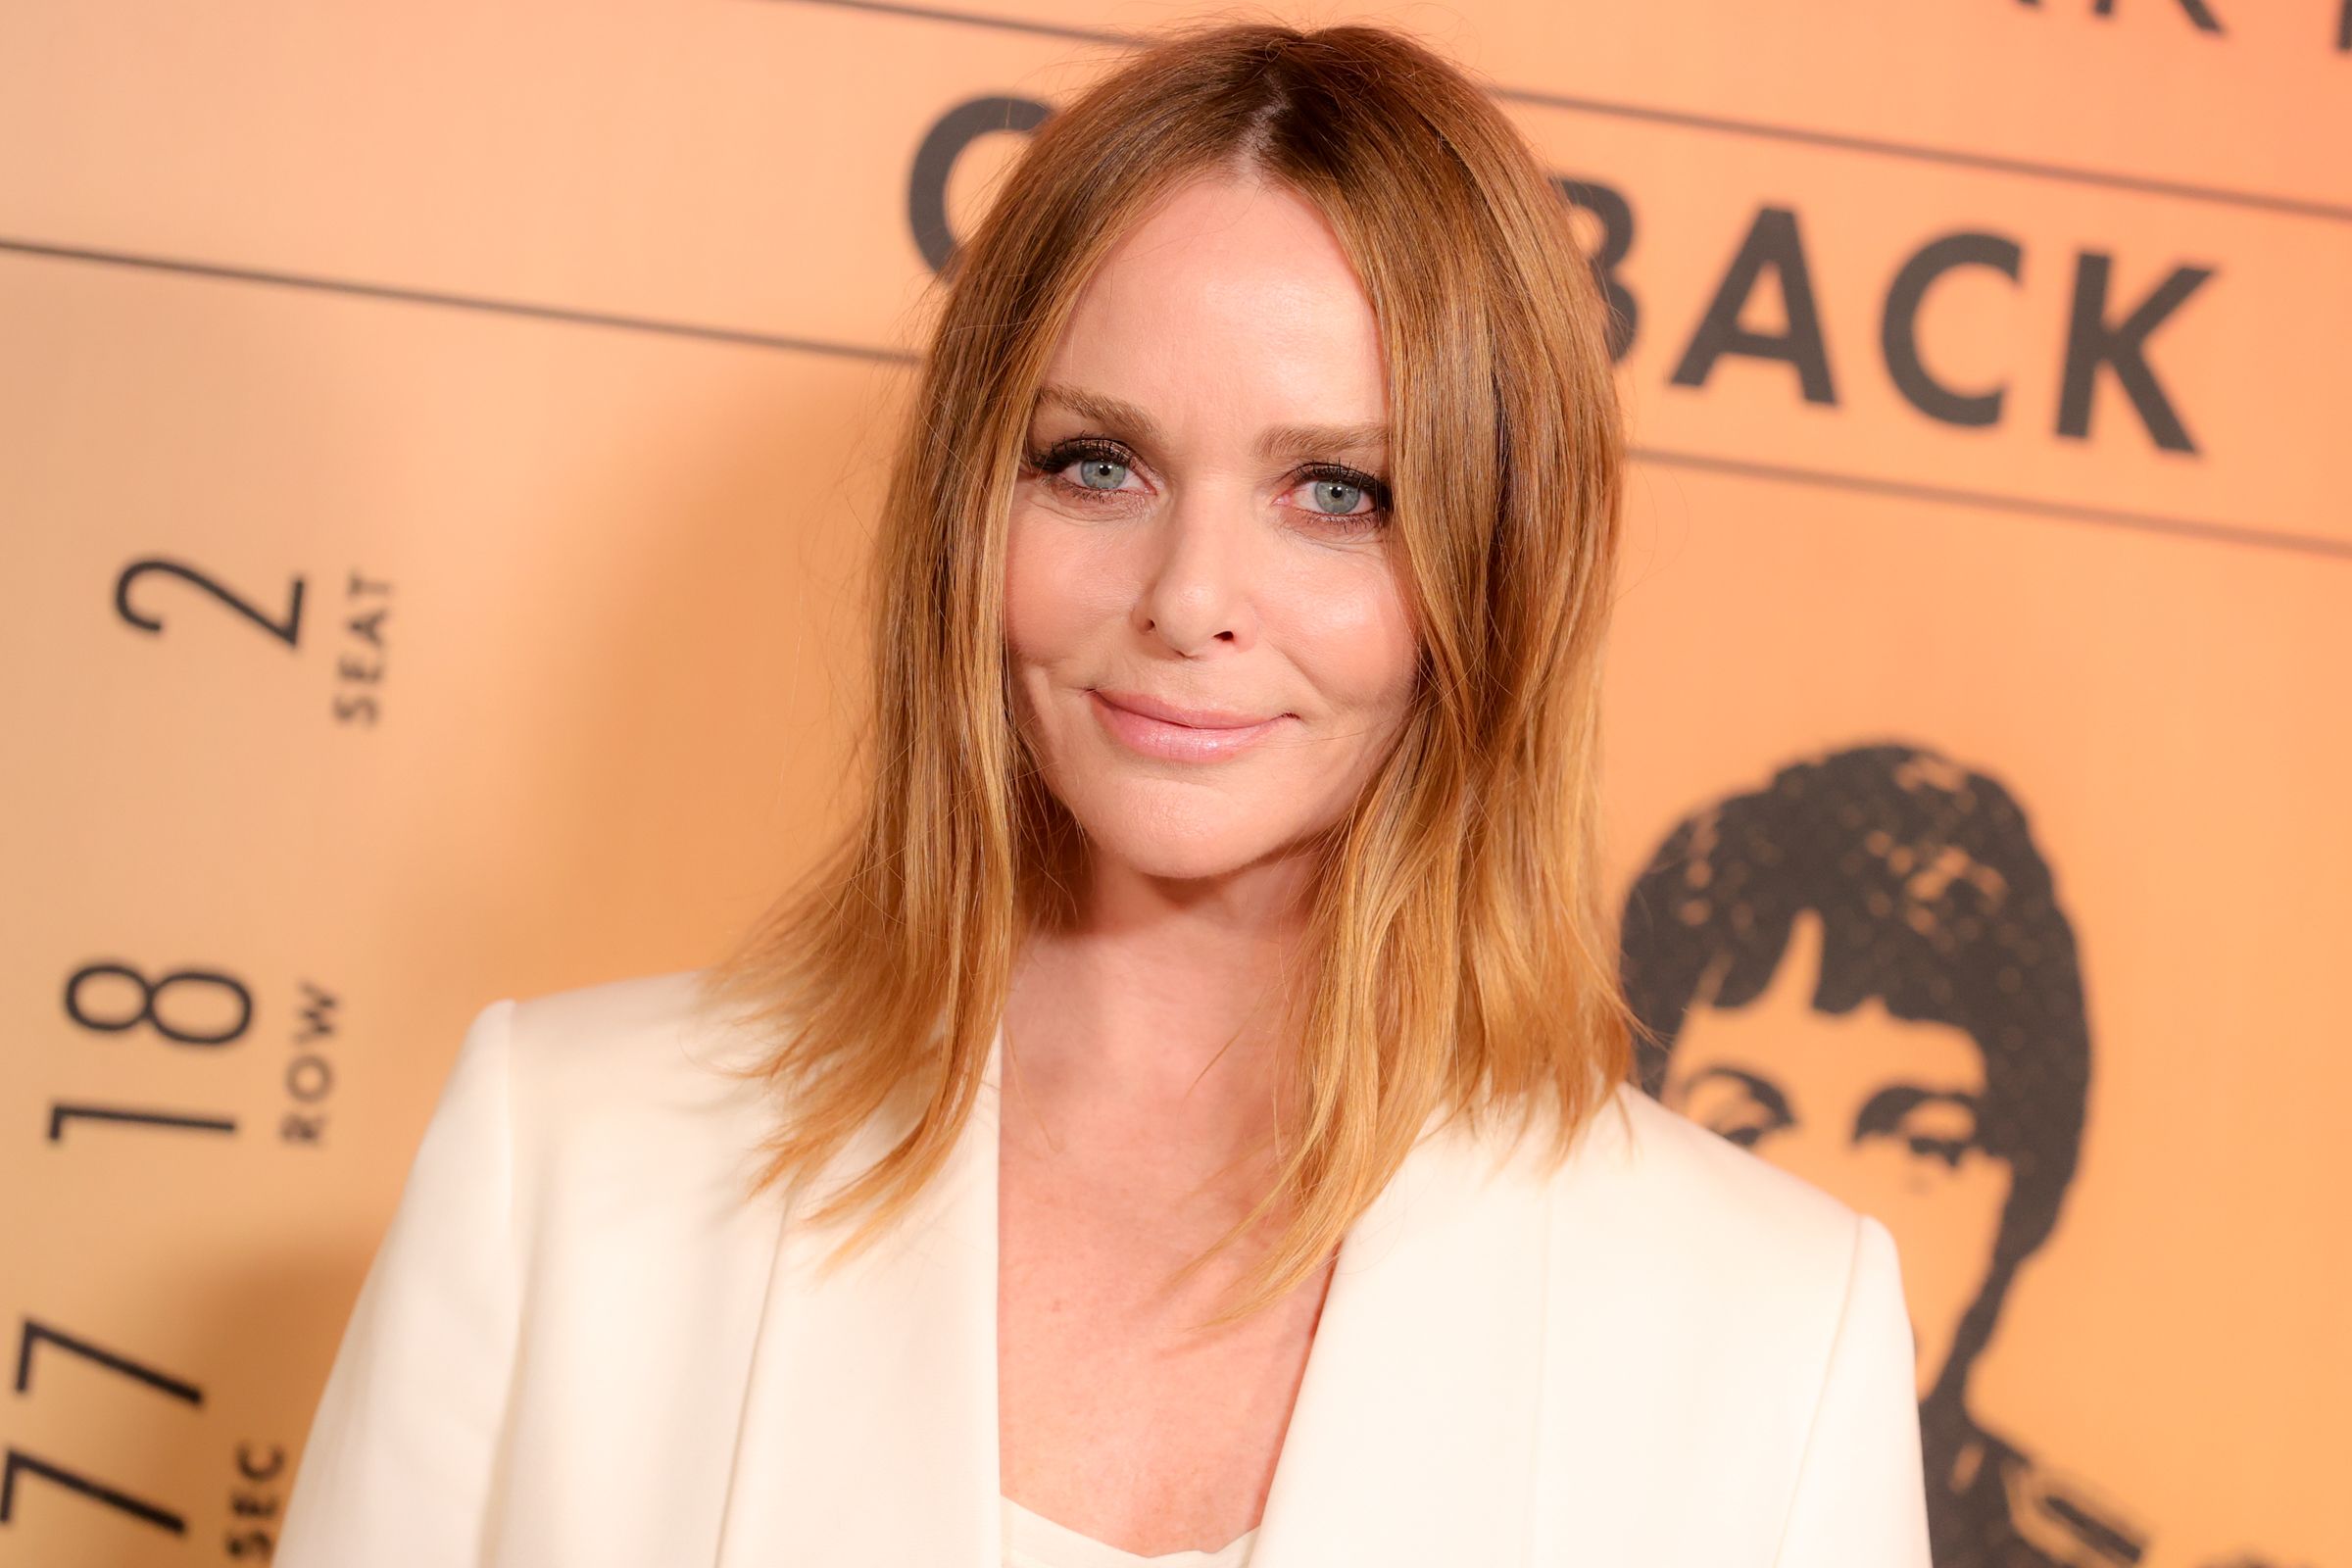 stella mccartney celebrates her new get back capsule collection and documentary release of peter jackson's get back